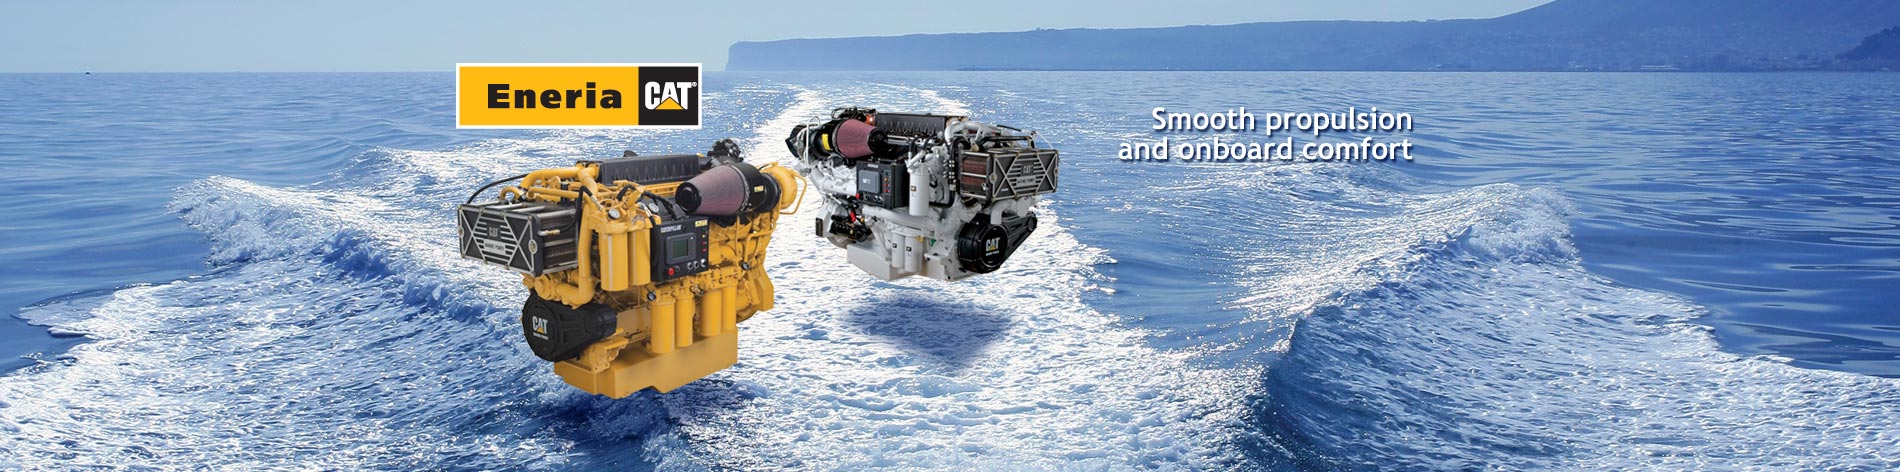 With a wide range of Caterpillar marine diesel engines, we offer the best technology, and provide the solution best suited to your project as well as impeccable post-sales service.